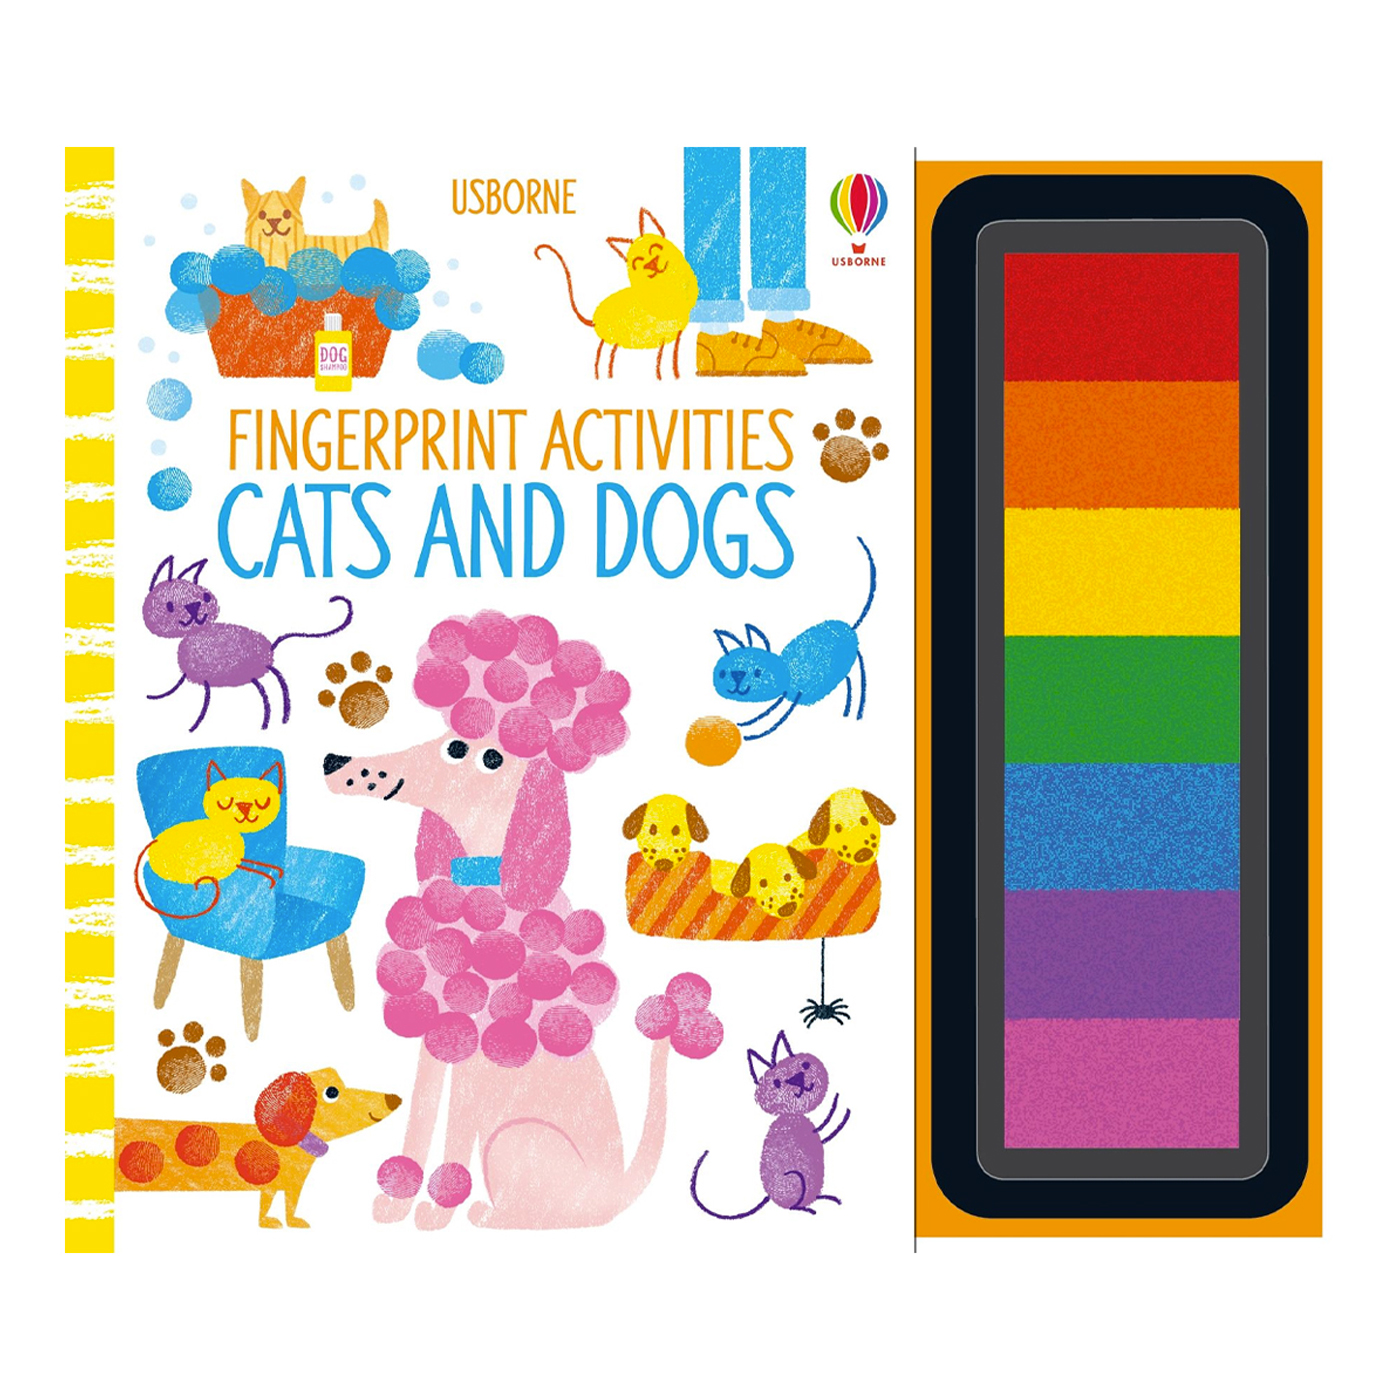  Fingerprint Activities Cats and Dogs